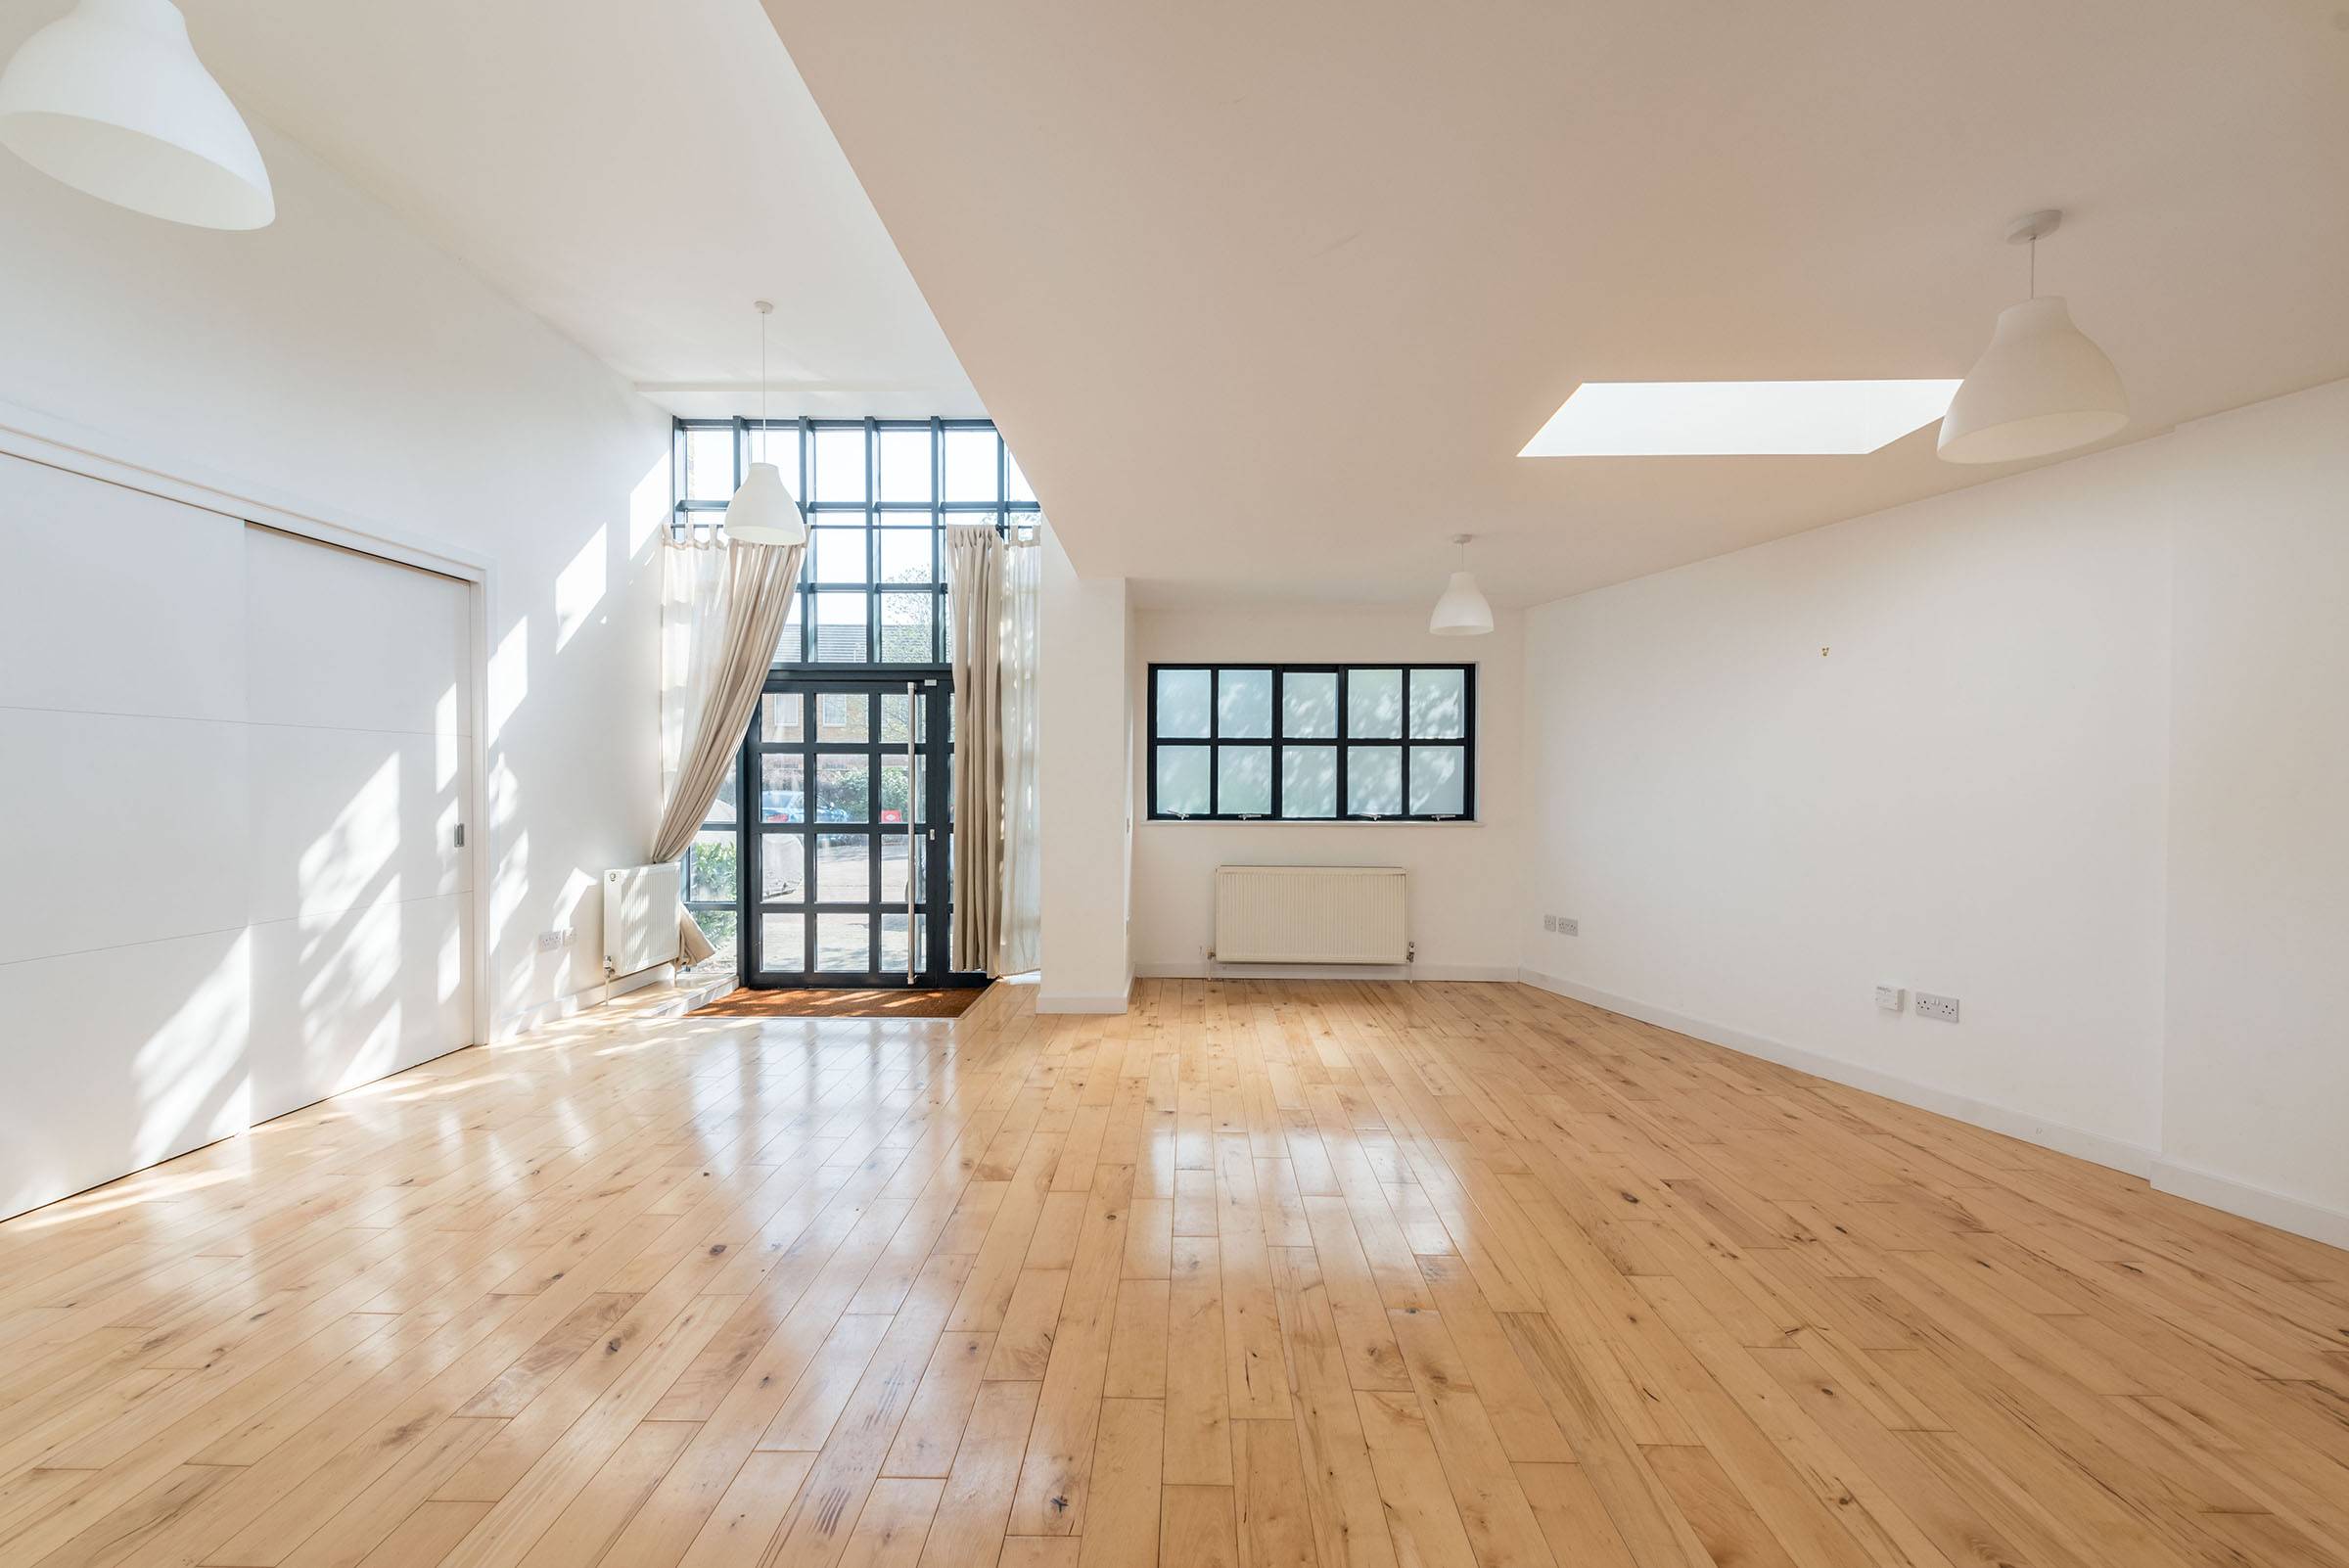 The Carlton Works, a converted former perfume factory loft in Peckham with two bedrooms, massive living area, high ceiling and huge period windows allowing lots of natural light. Perfectly suited for those looking for spacious cool place to live.